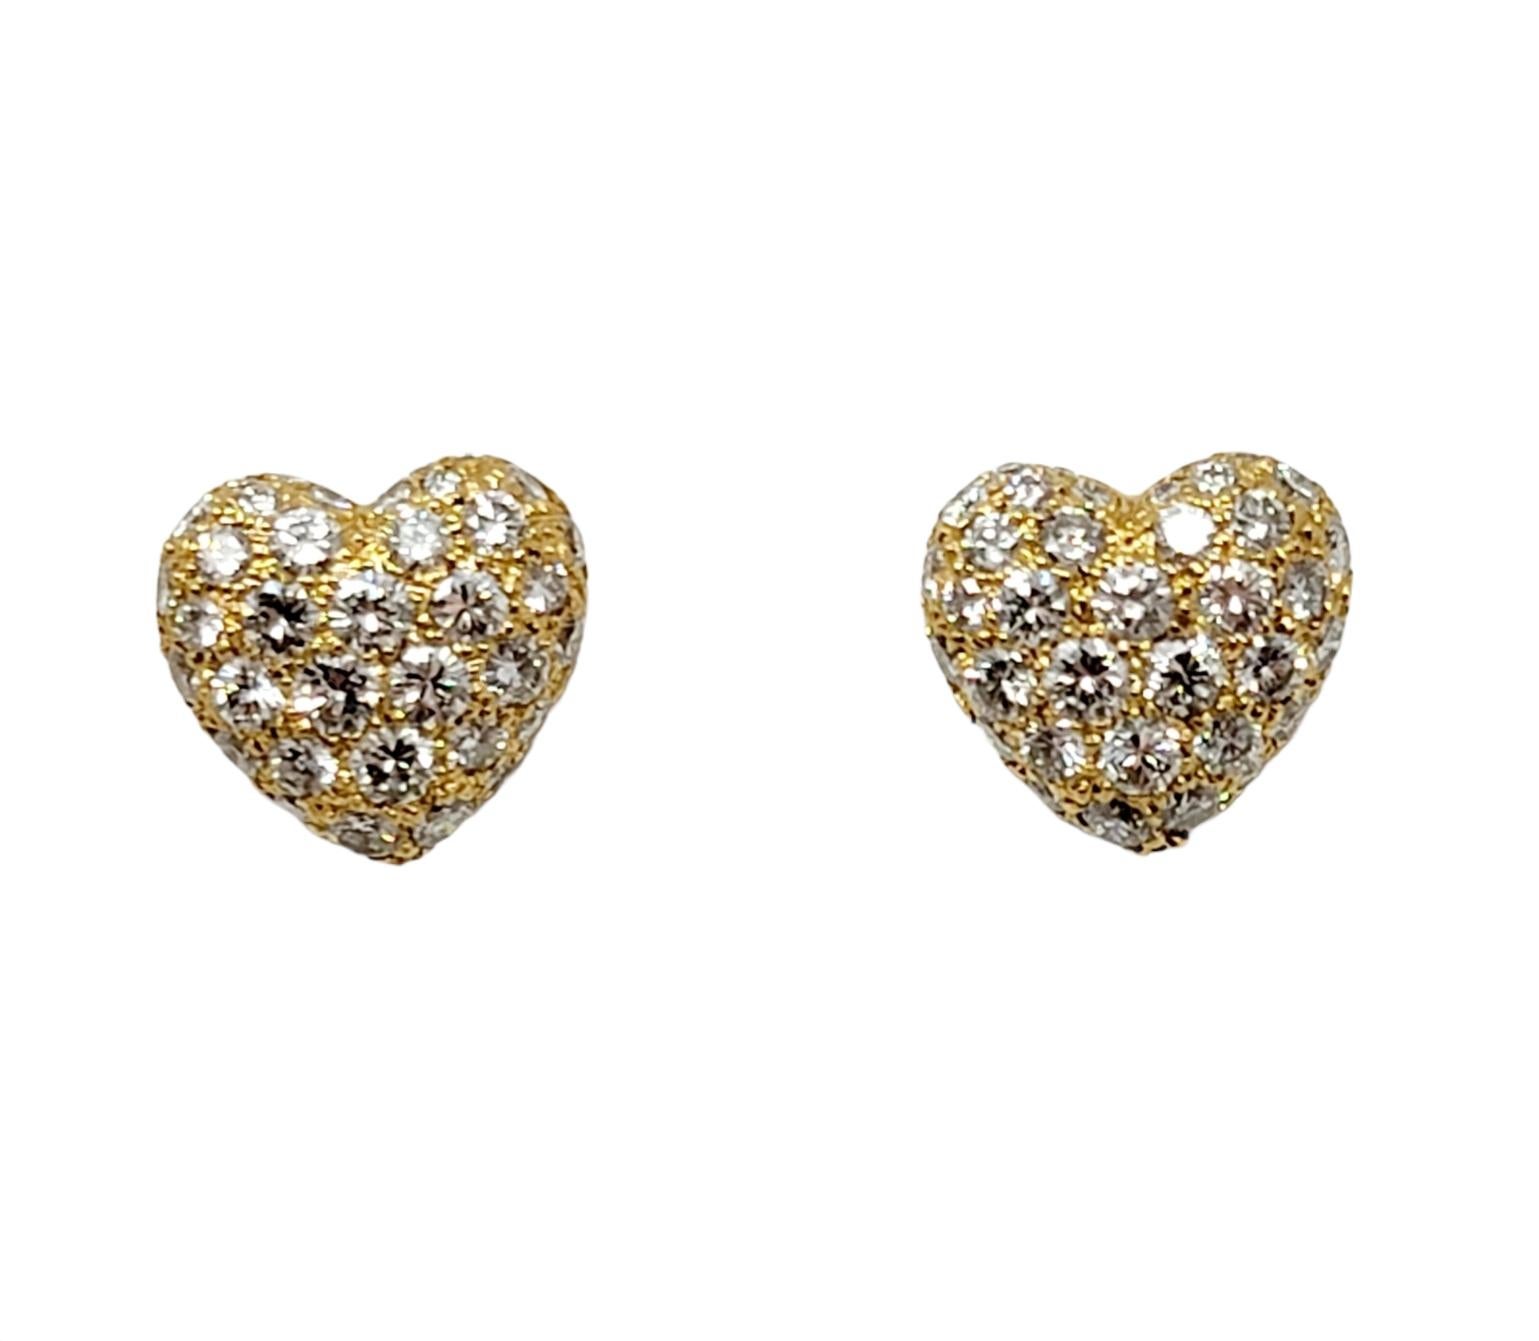 Round Cut Cartier 1.20 Carat Total Diamond Pave Heart Stud Earrings in 18 Karat Gold For Sale